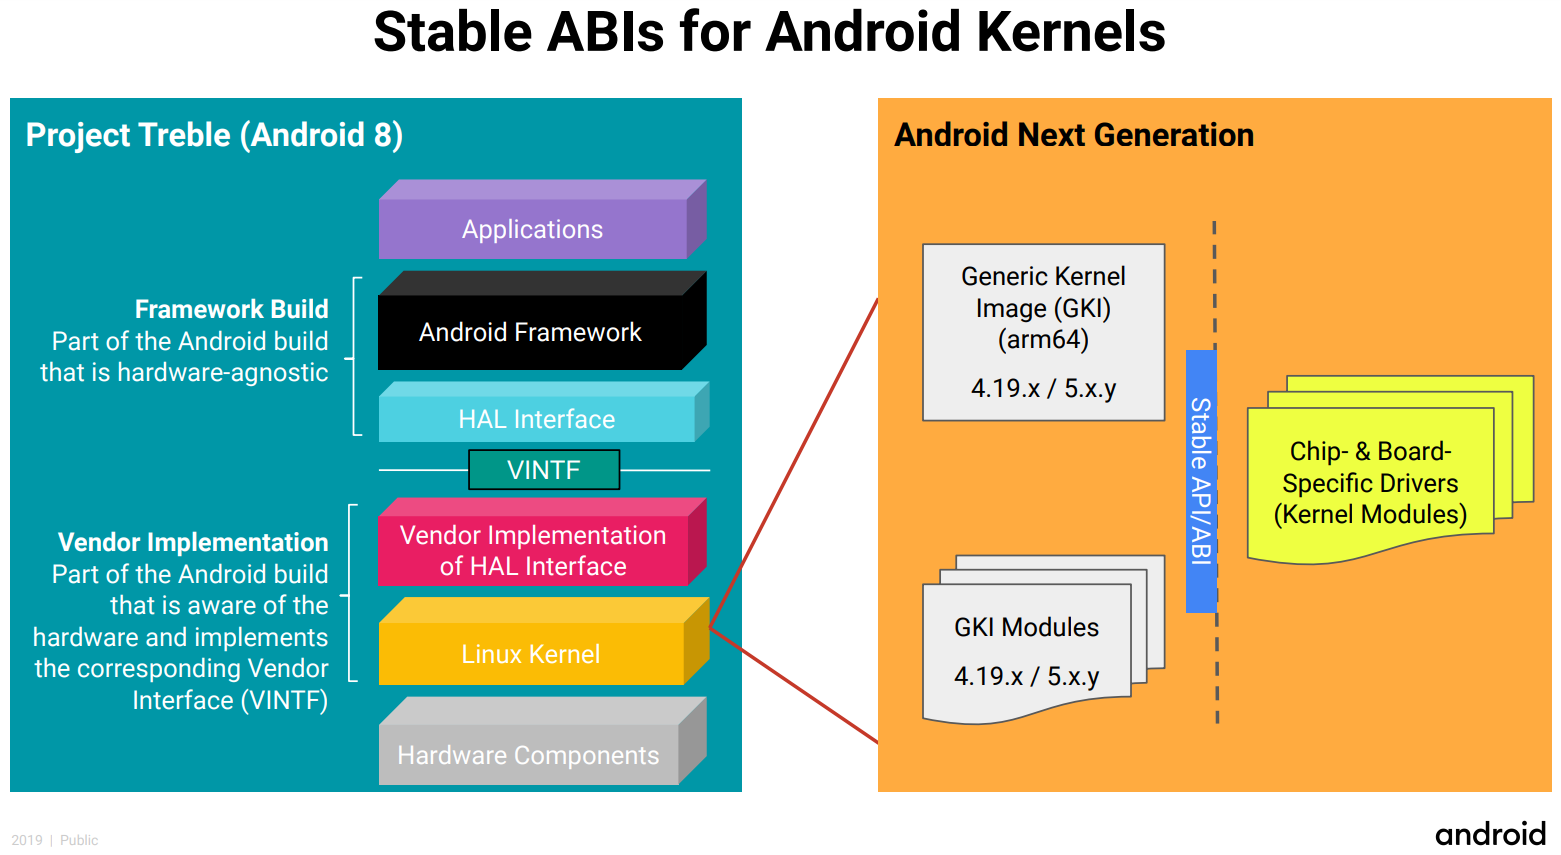 ABIs for Android kernels